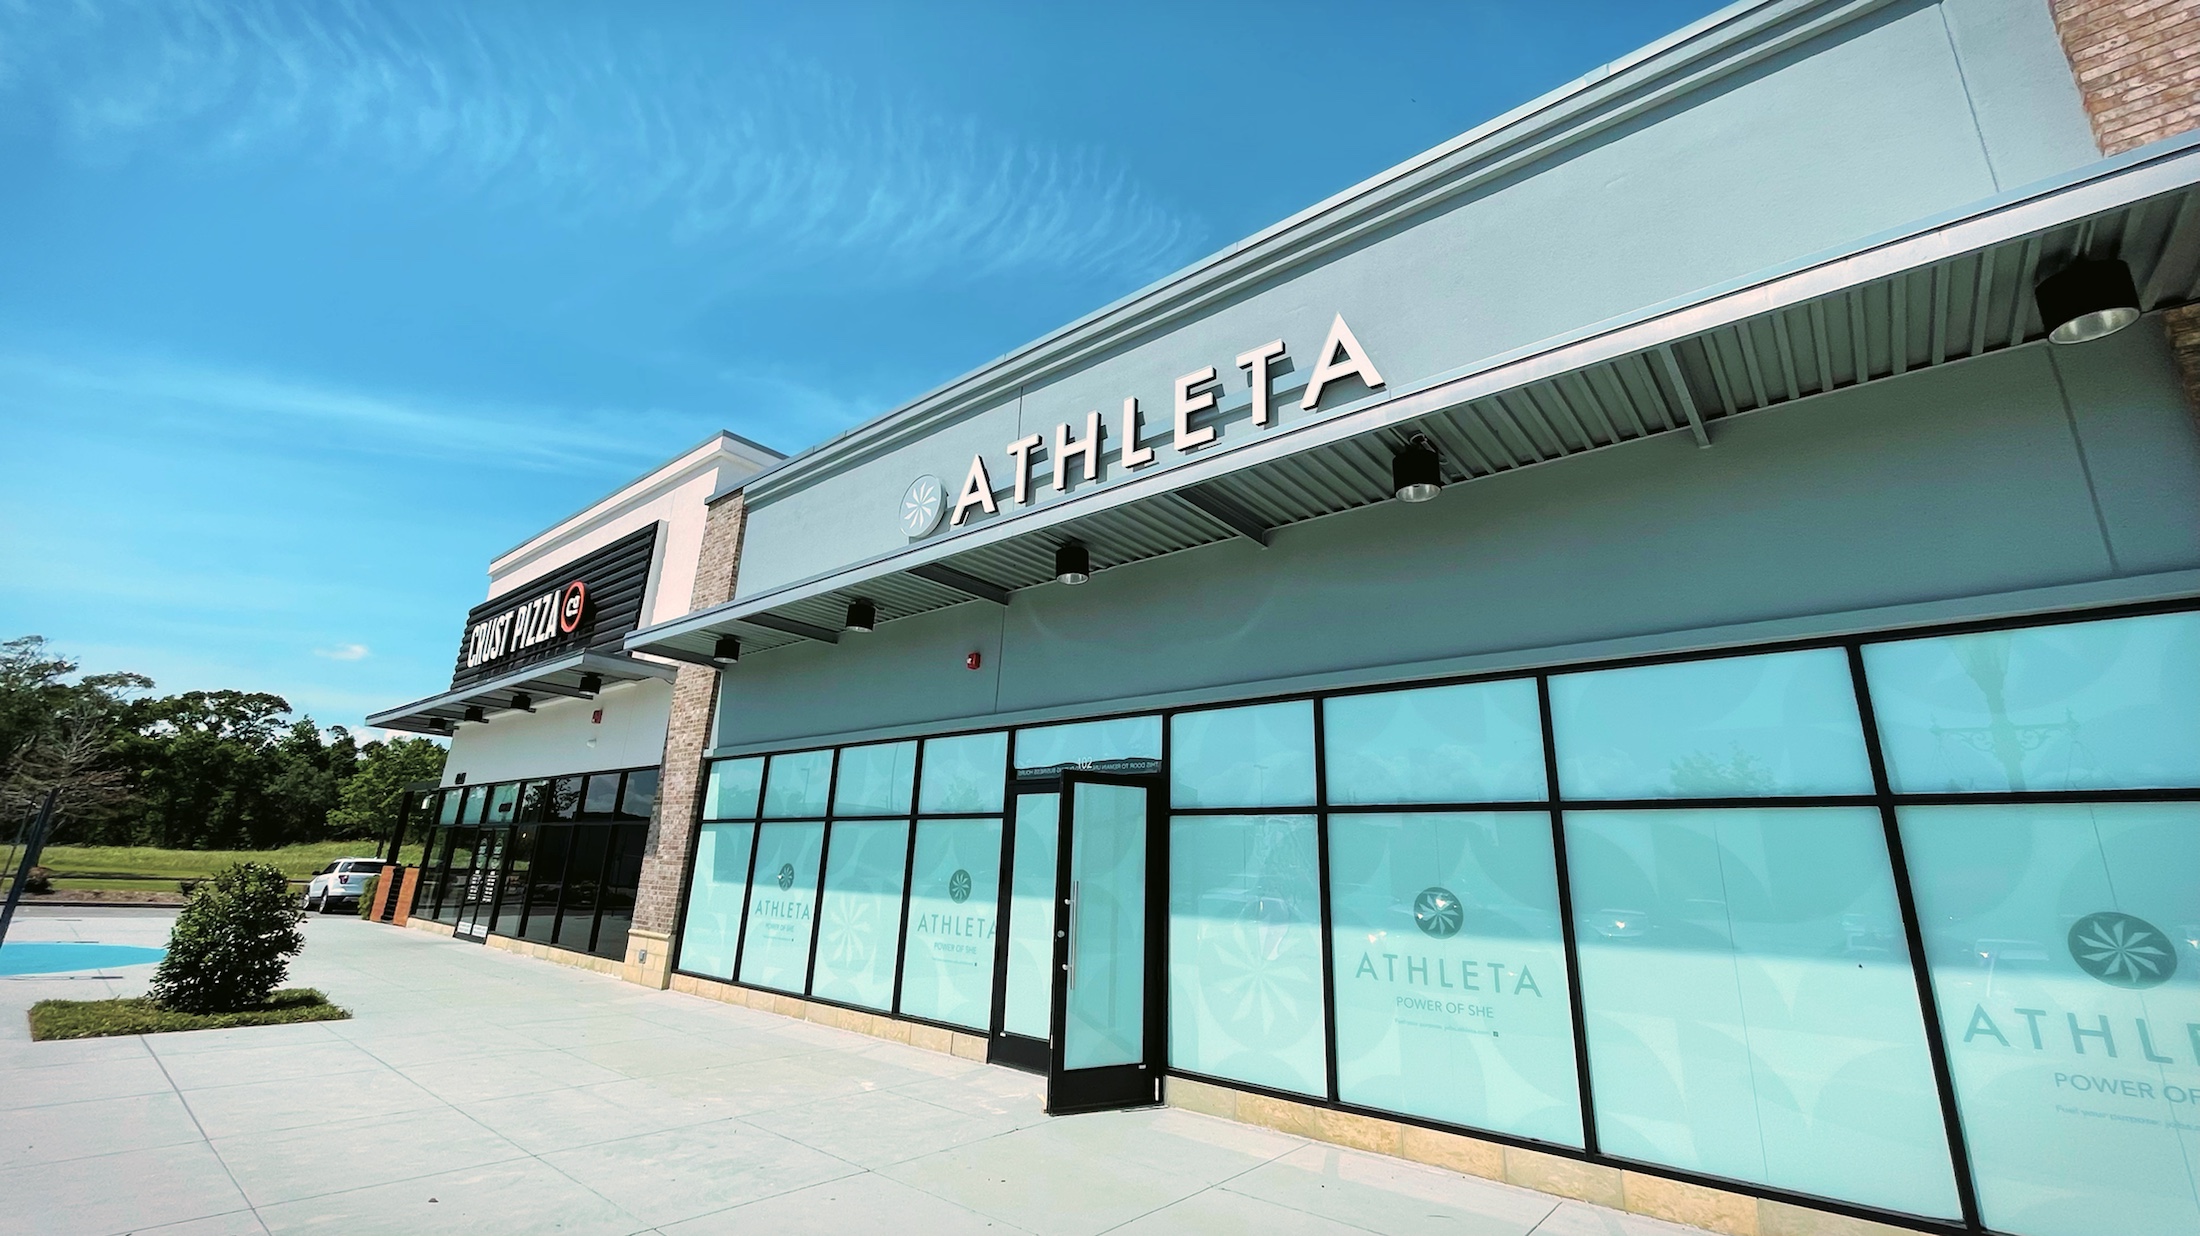 Athleta is opening its first store in the Buffalo market - Buffalo